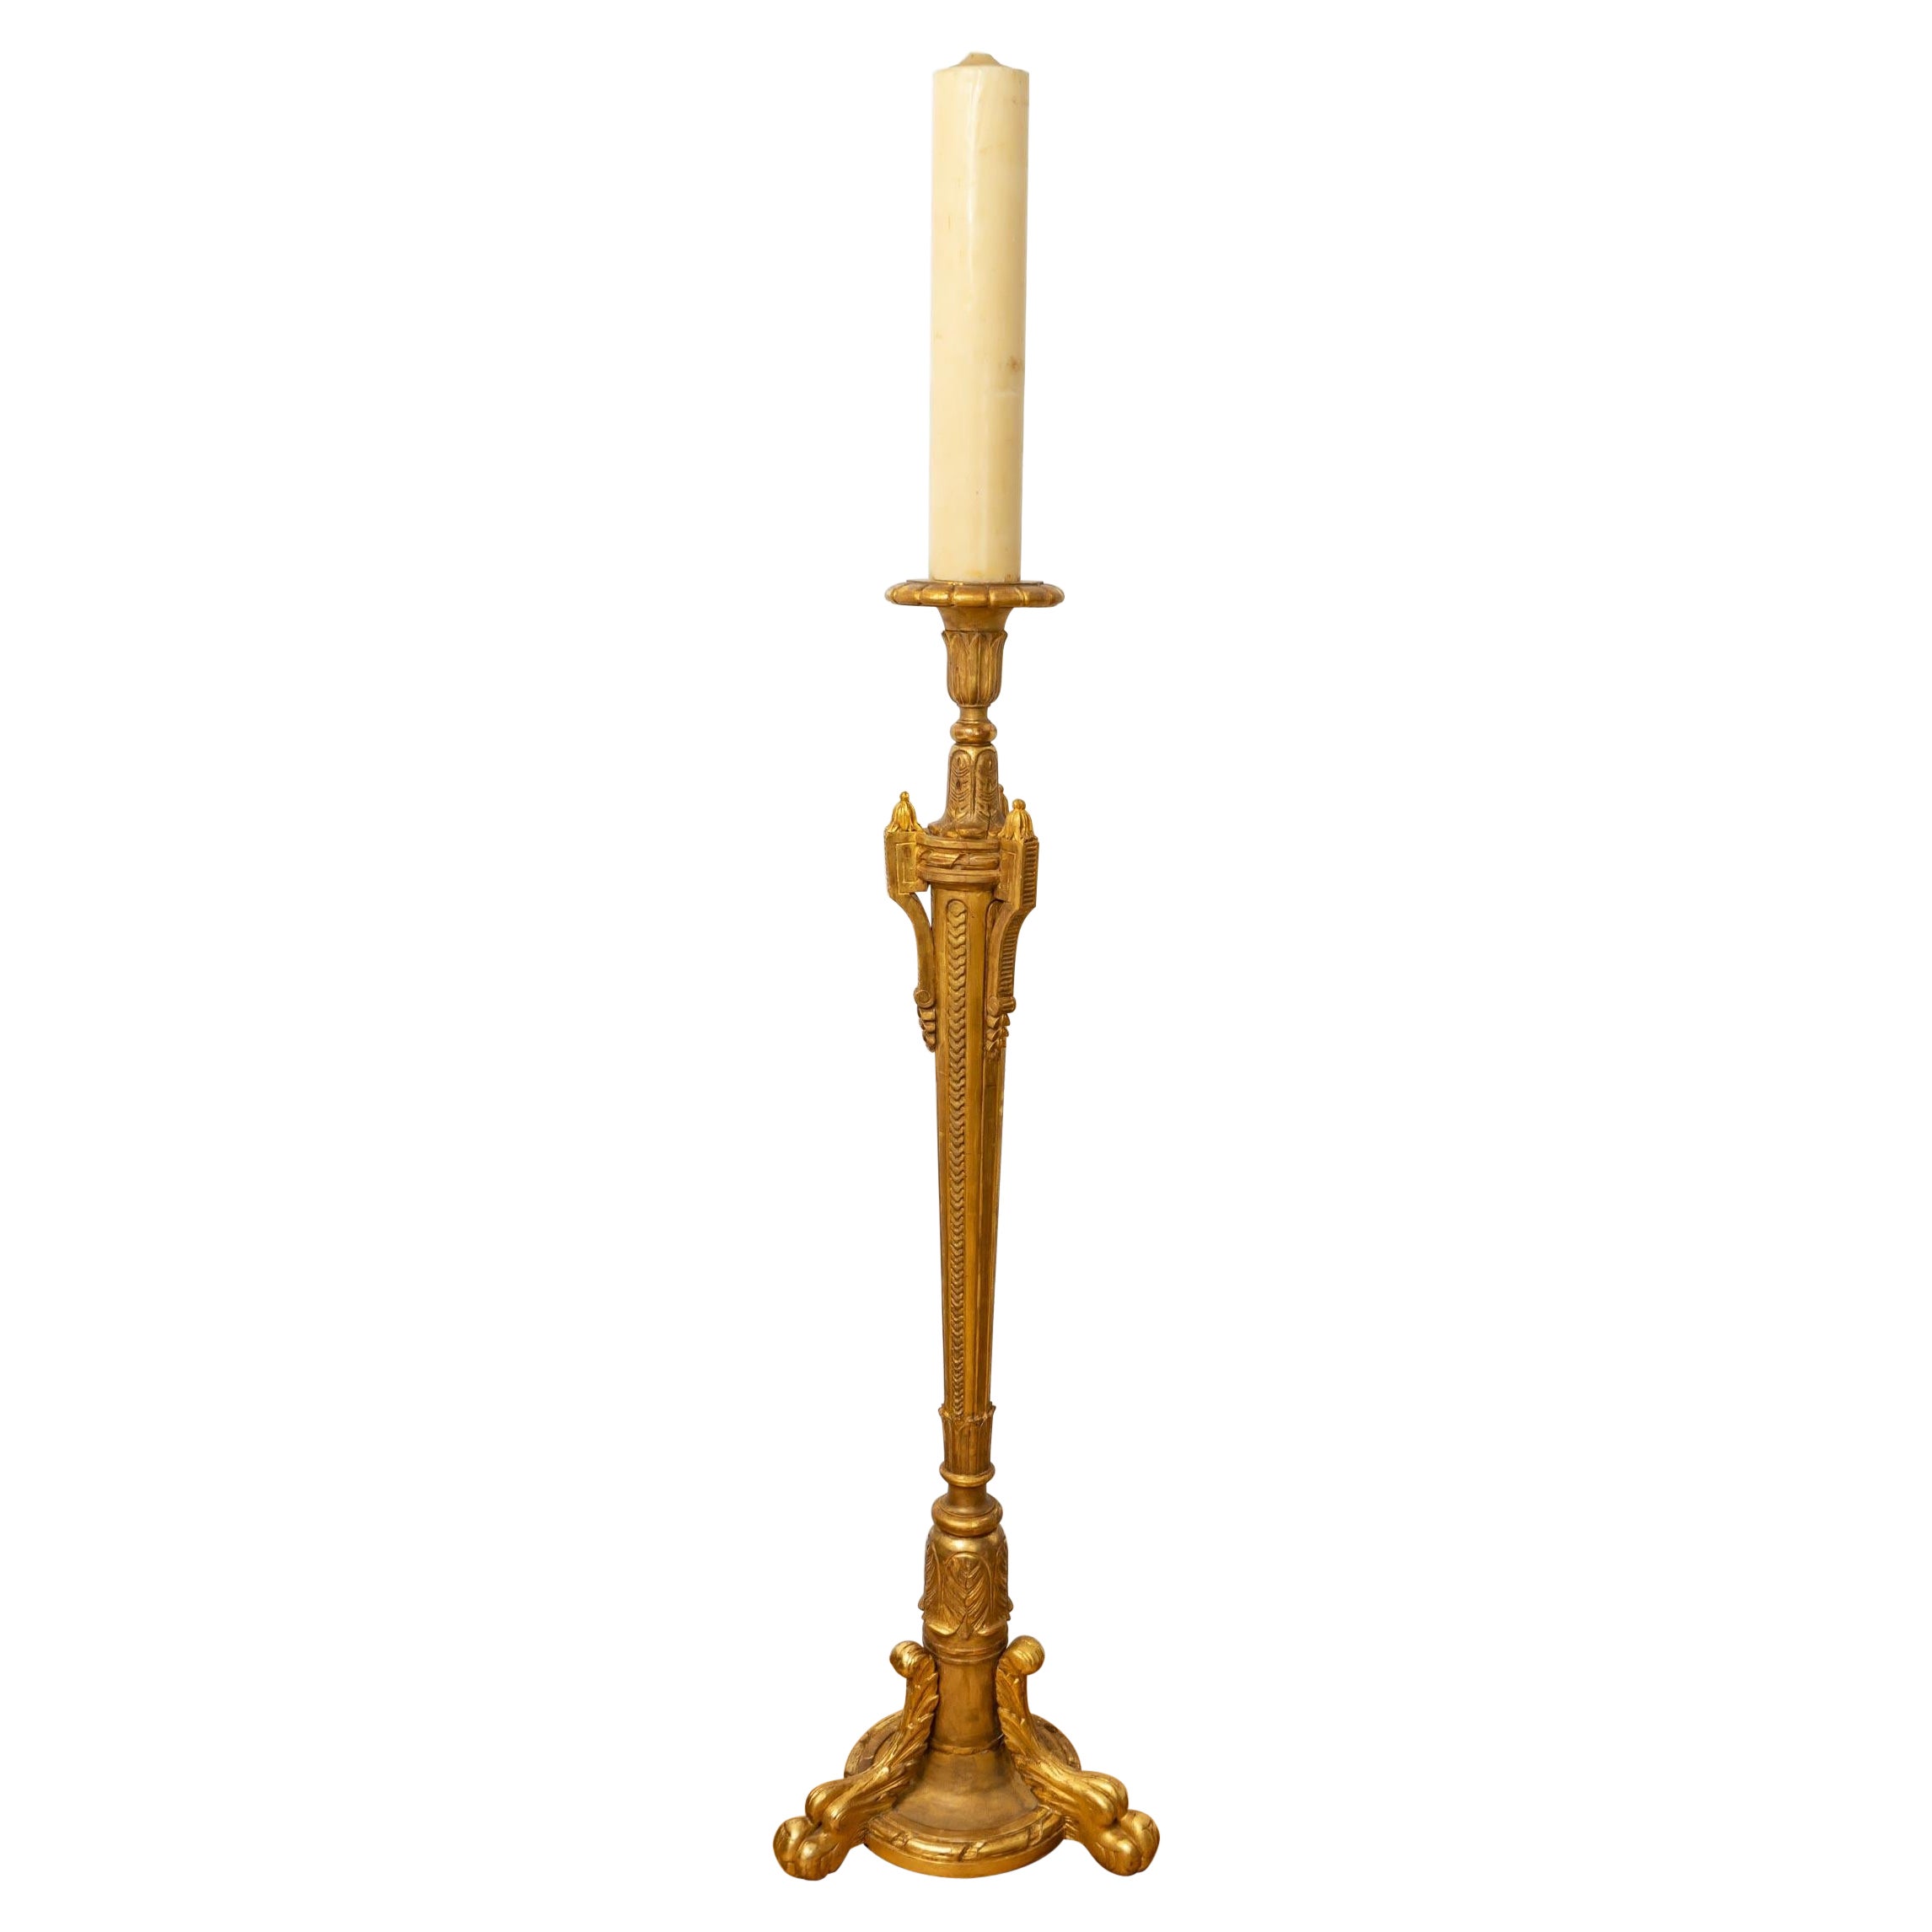 Large Pic Candle Or Verge Candlestick - Golden Wood With Leaf - Period: XIXth  For Sale